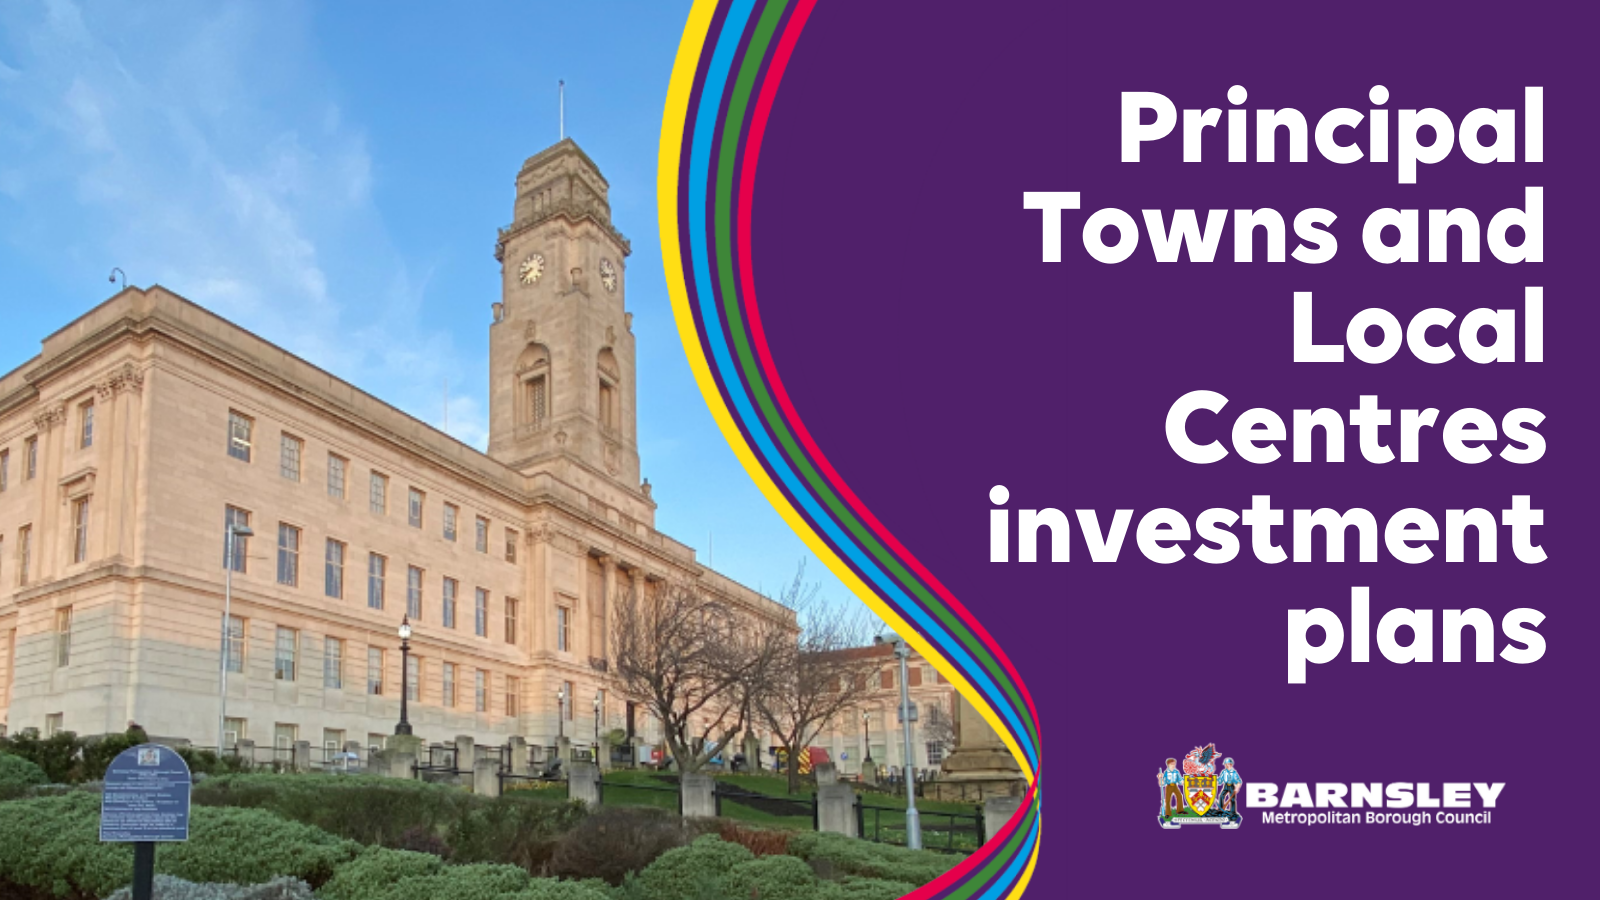 Principal Towns and Local Centres investment plans